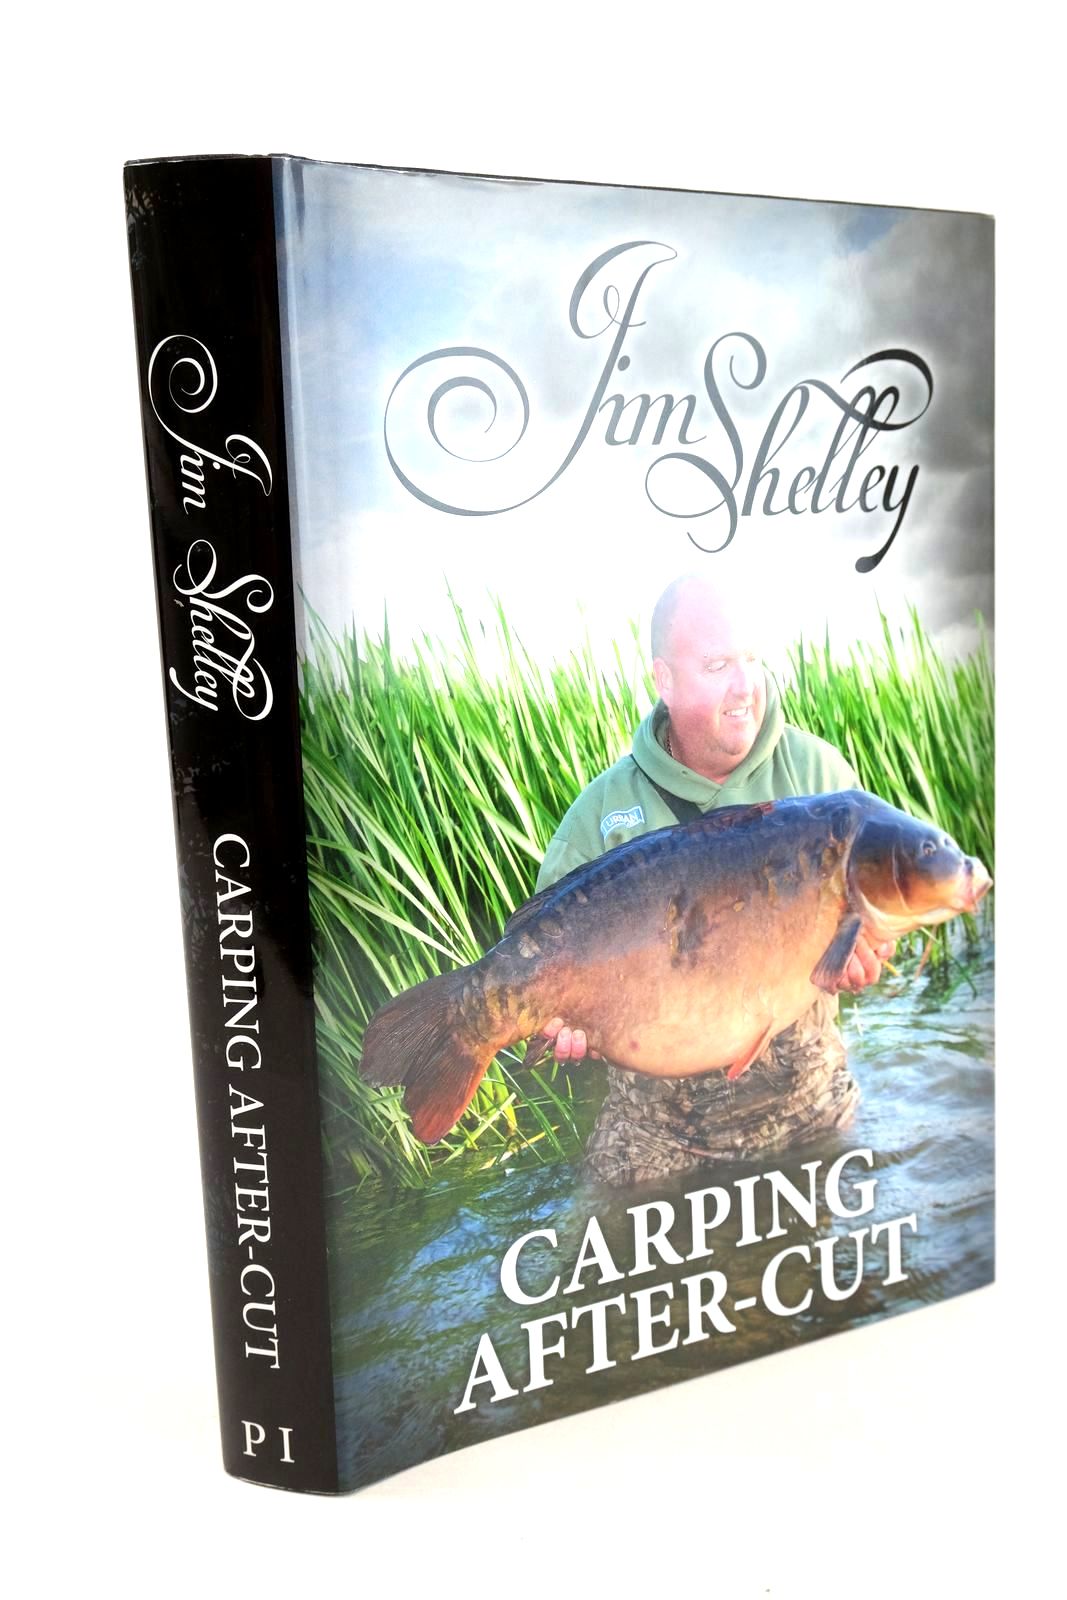 Photo of CARPING AFTER-CUT written by Shelley, Jim published by Jim Shelley (STOCK CODE: 1327633)  for sale by Stella & Rose's Books